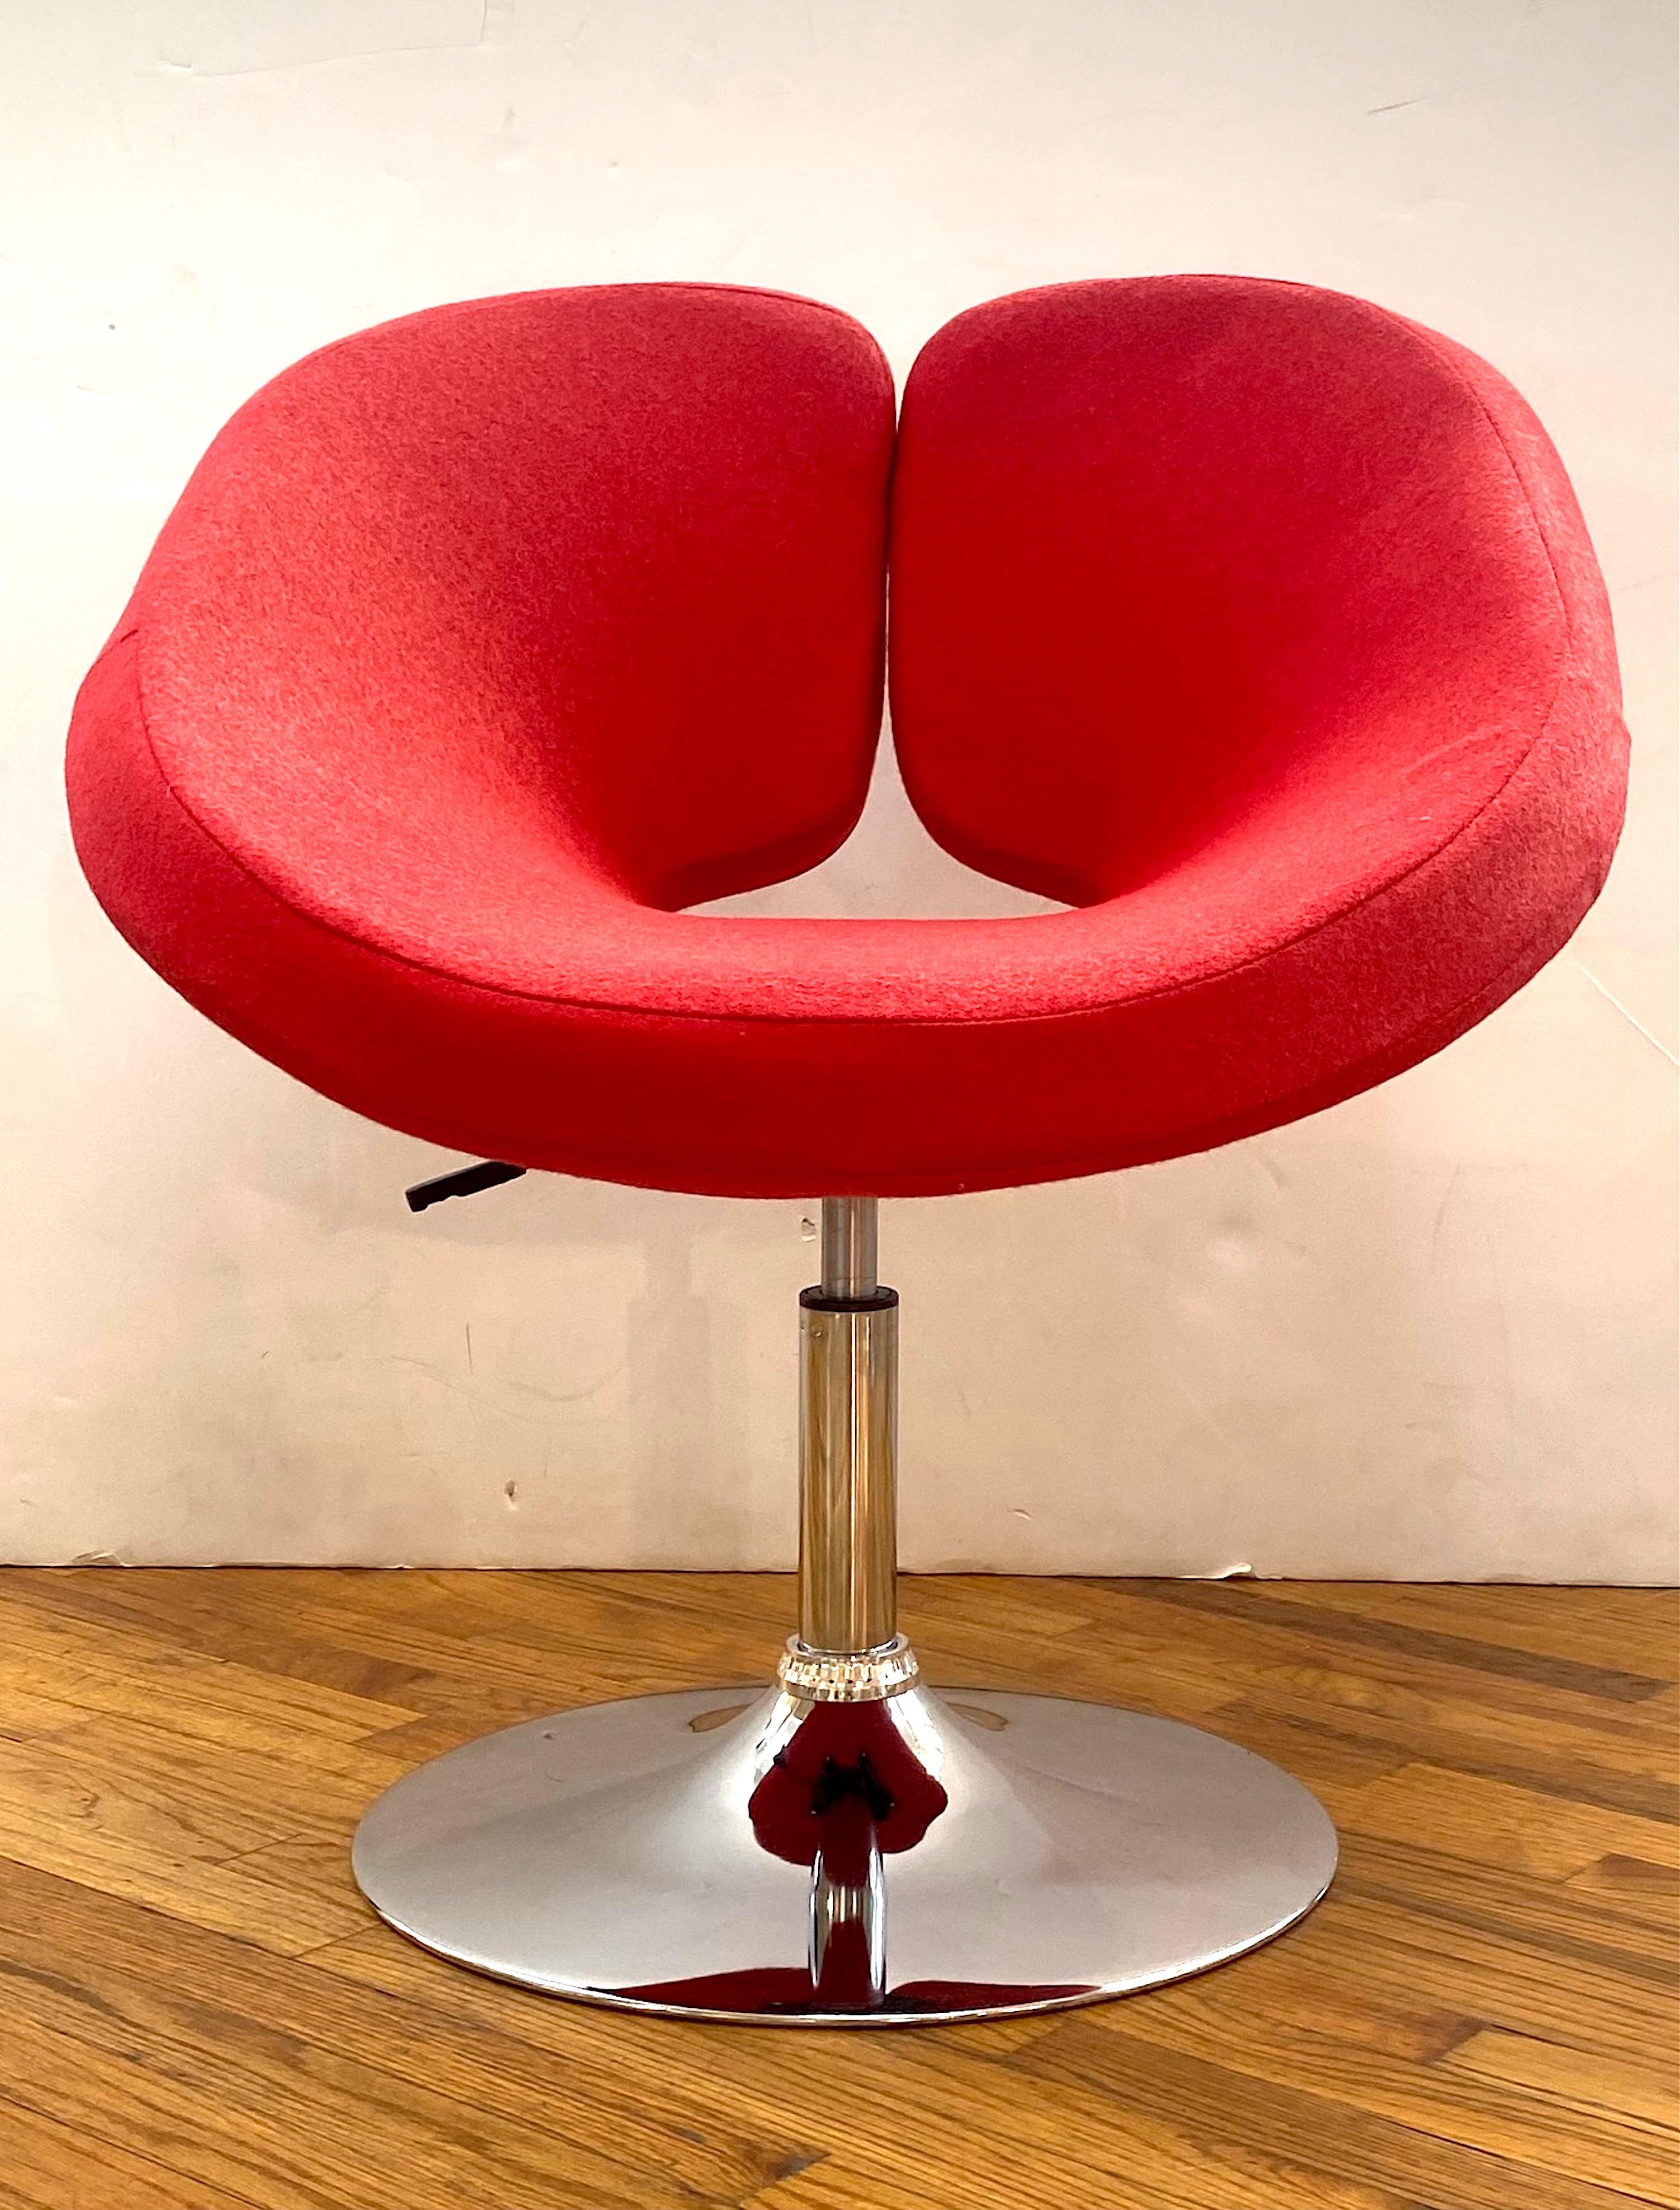 A statement making pair of modern ribbon style seat and adjustable chairs from the early 1980s. No makers mark but quality pieces. Fresh from an estate and purchased by the owners in 1983, the chairs feature a trumpet shape pedestal base and red